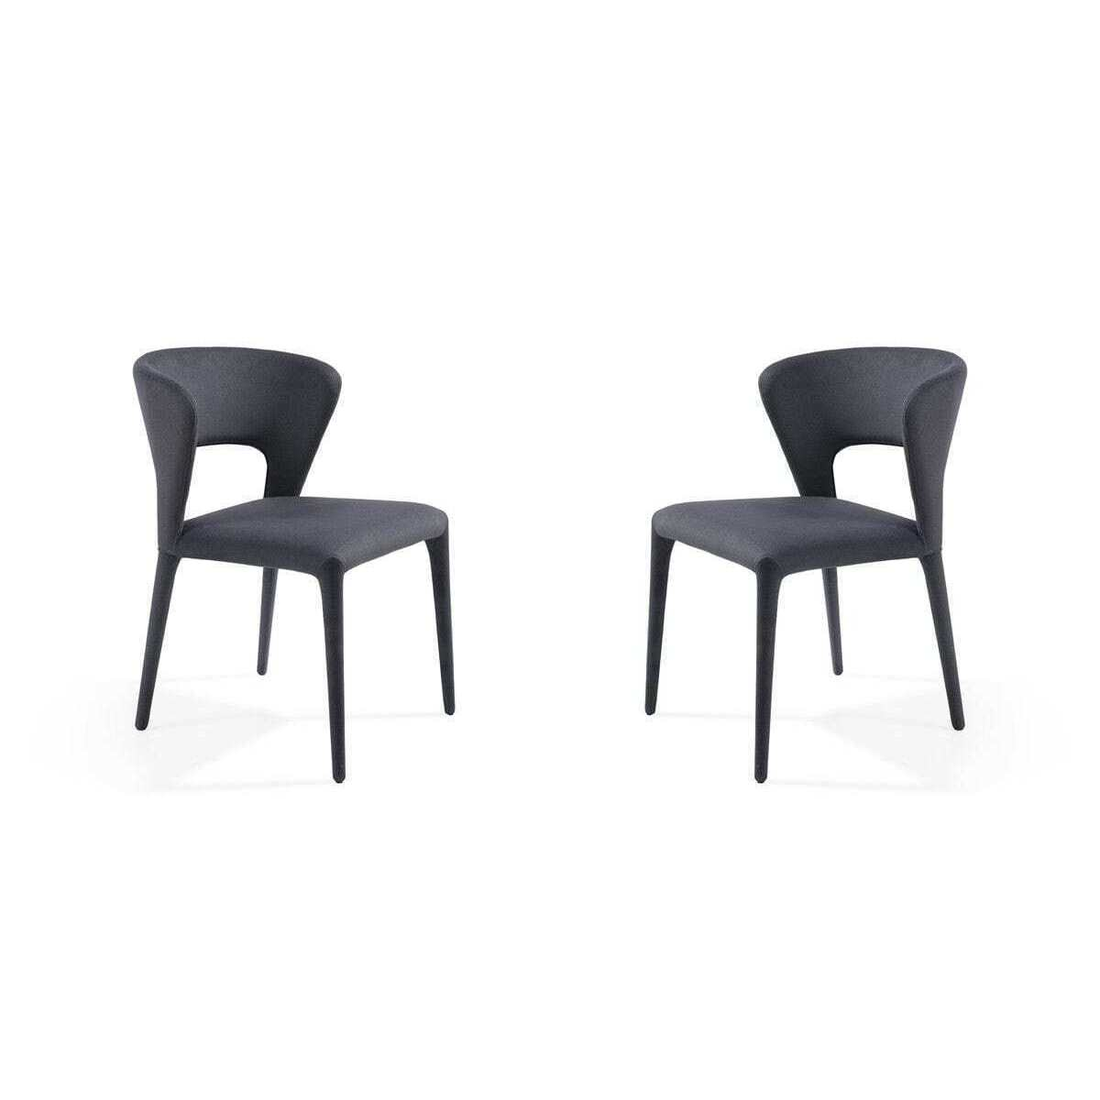 Pari I Dining Chair - Luxe Cinder Grey - Set of 2